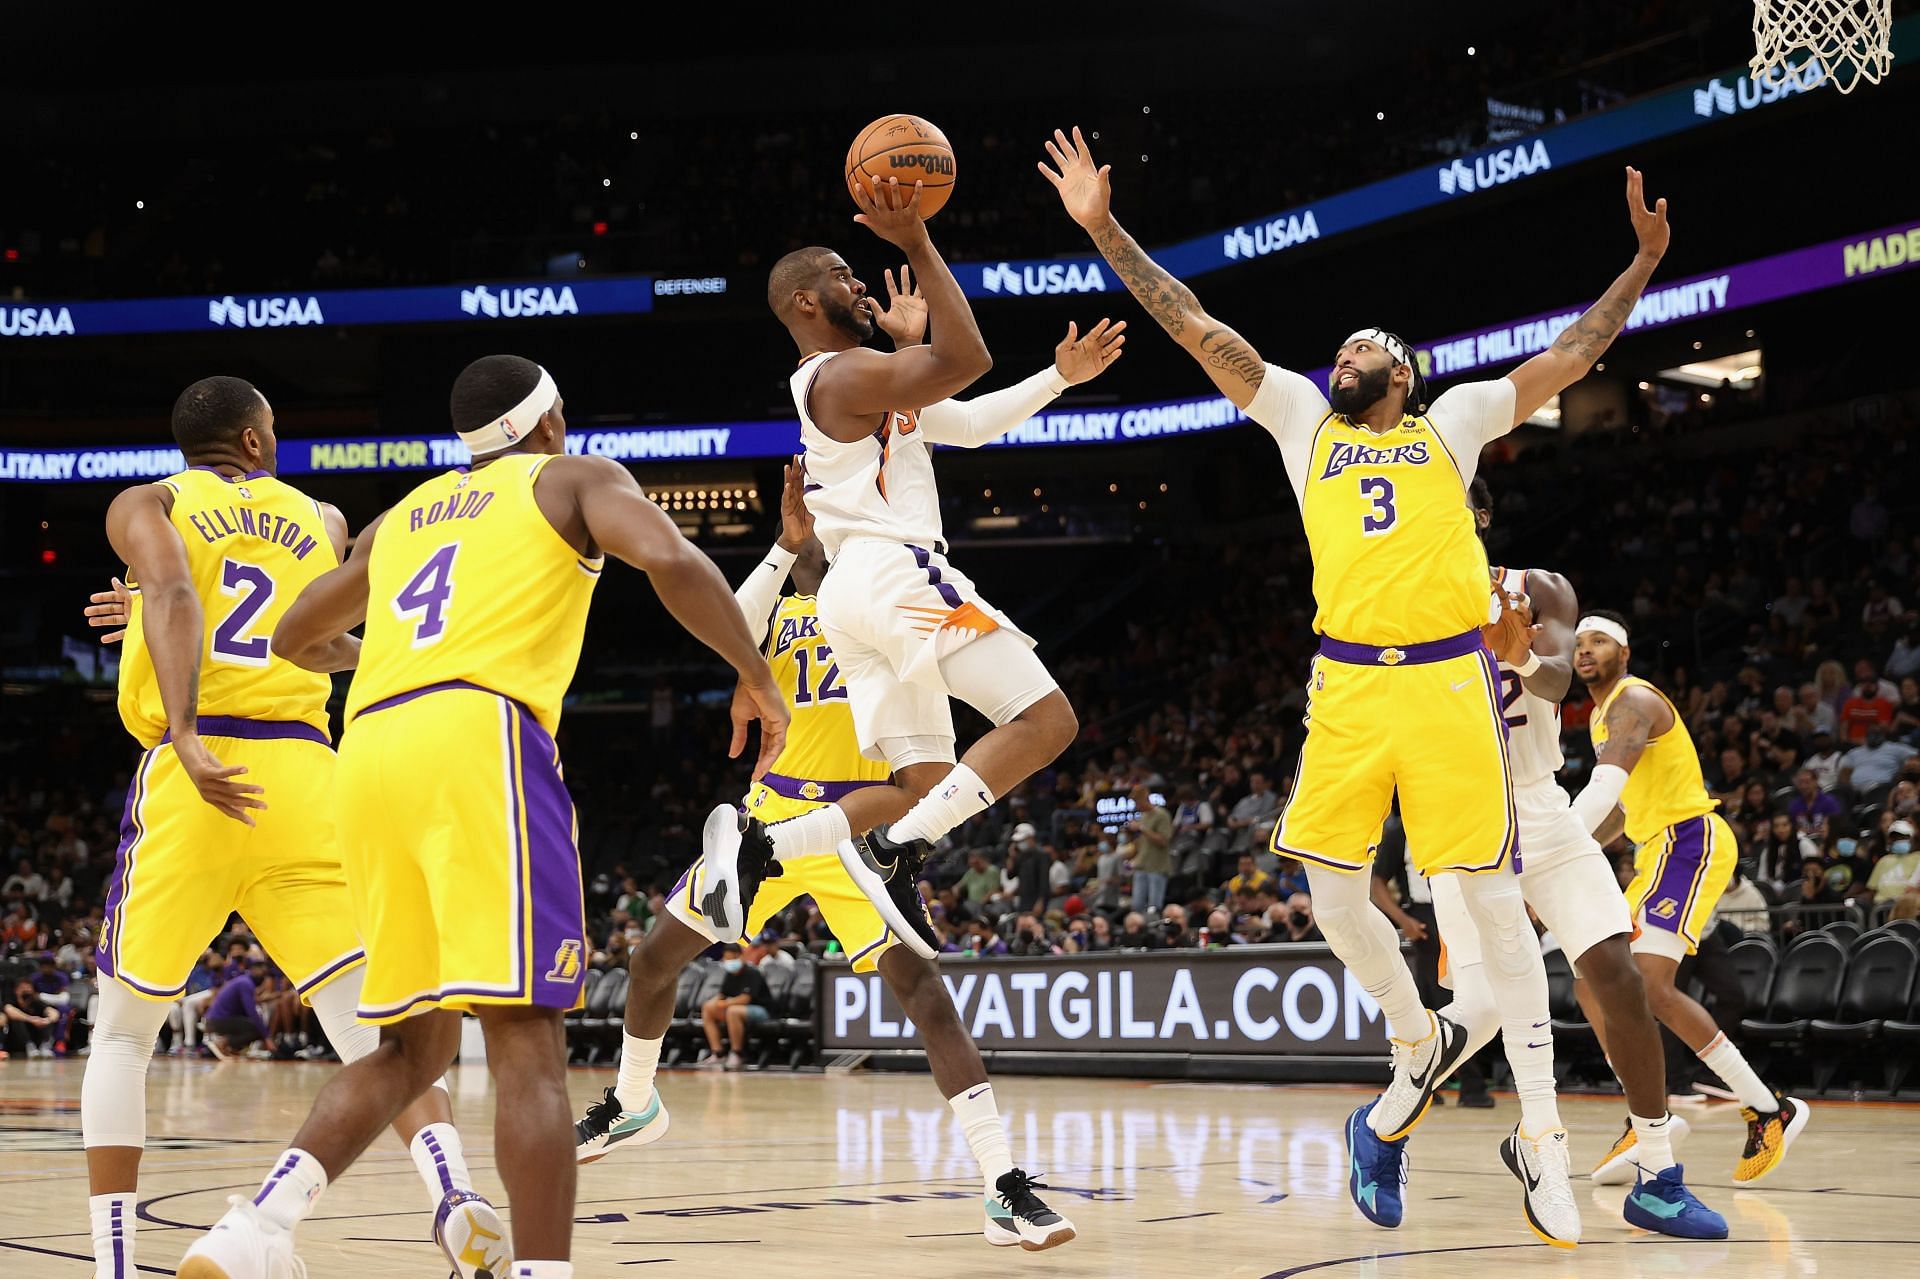 Limiting turnovers and effort will be needed by the LA Lakers to get back to winning ways